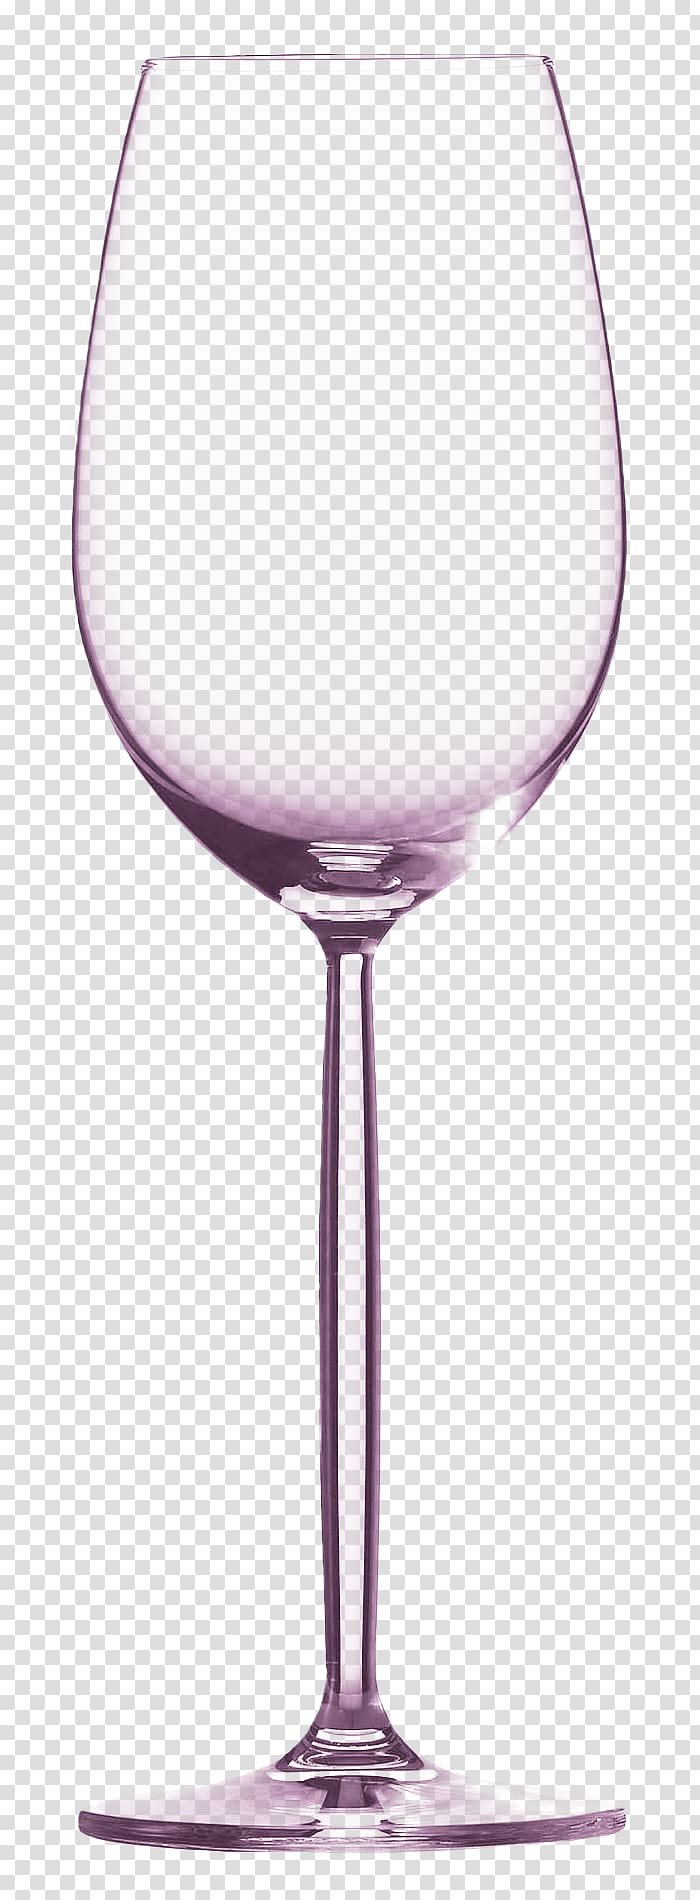 White wine Red Wine Wine glass, Purple cup transparent background PNG clipart